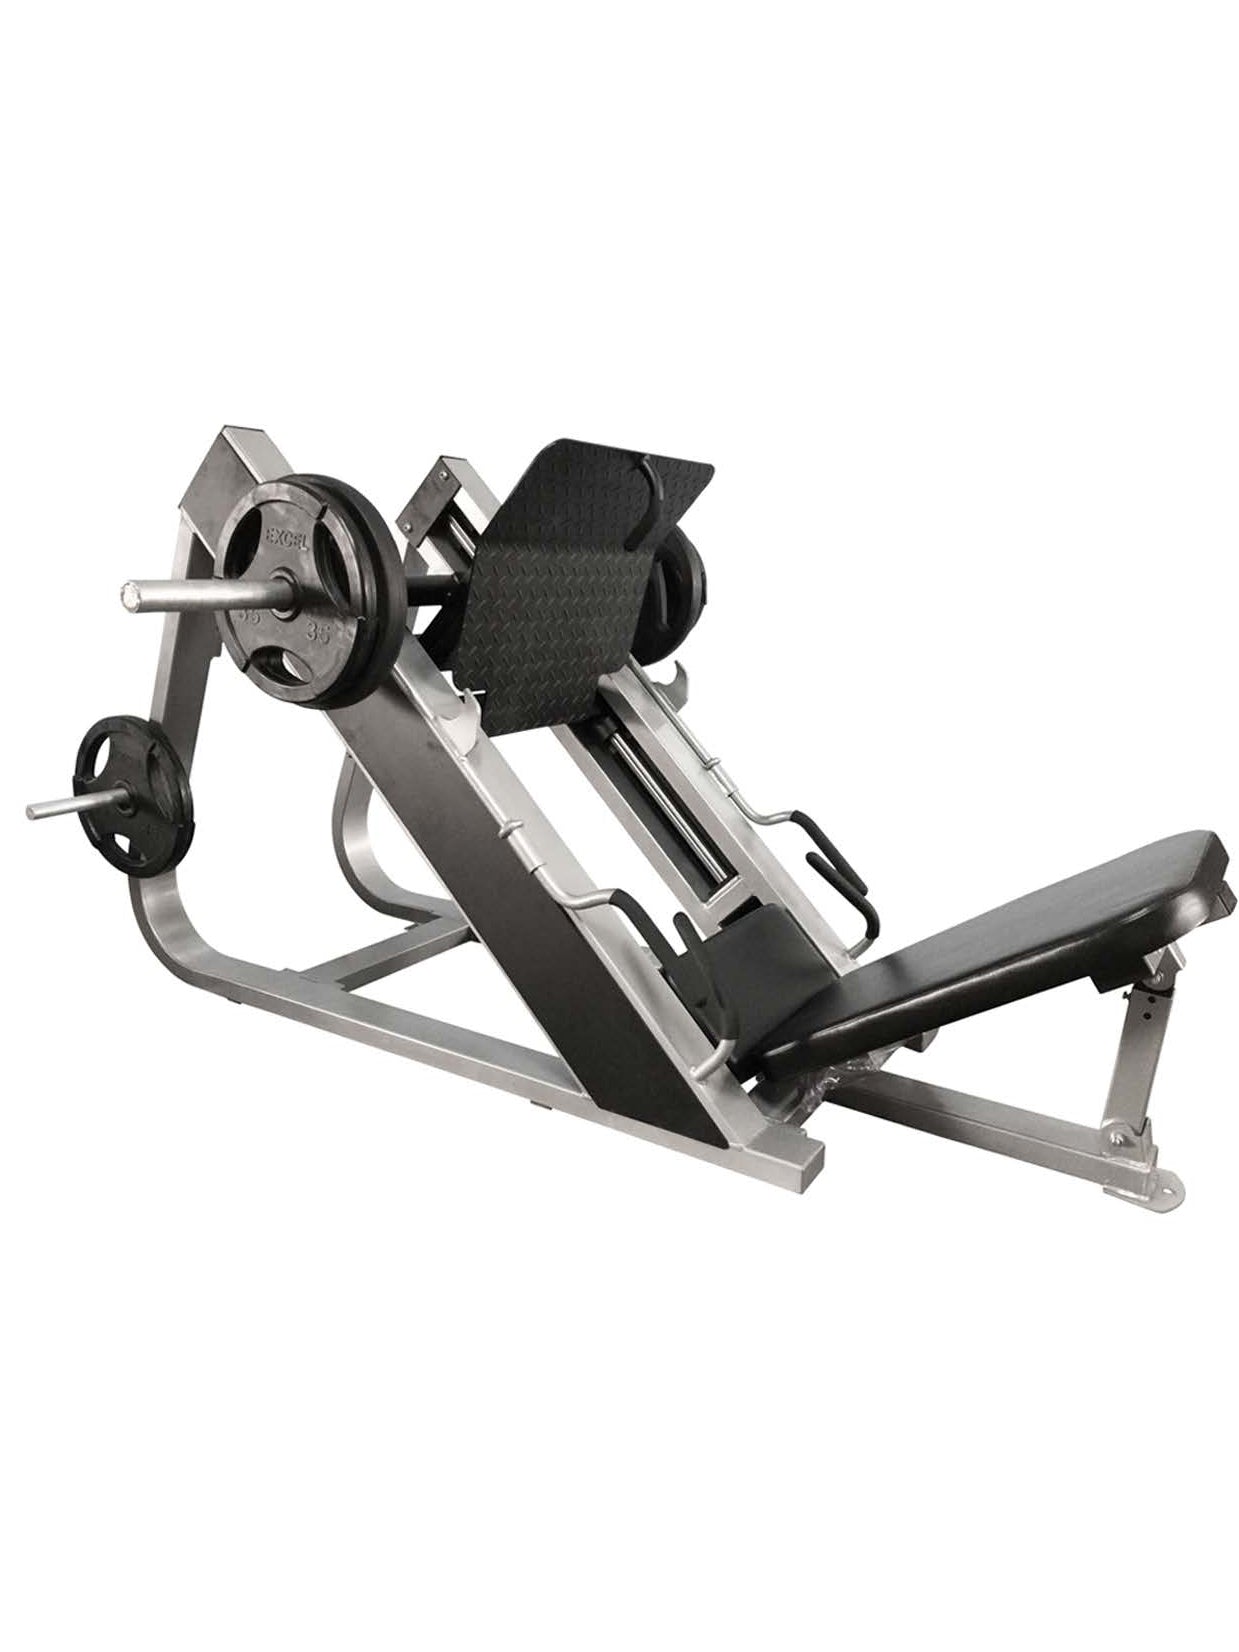 45-Degree Compact Leg Press – Muscle D Fitness